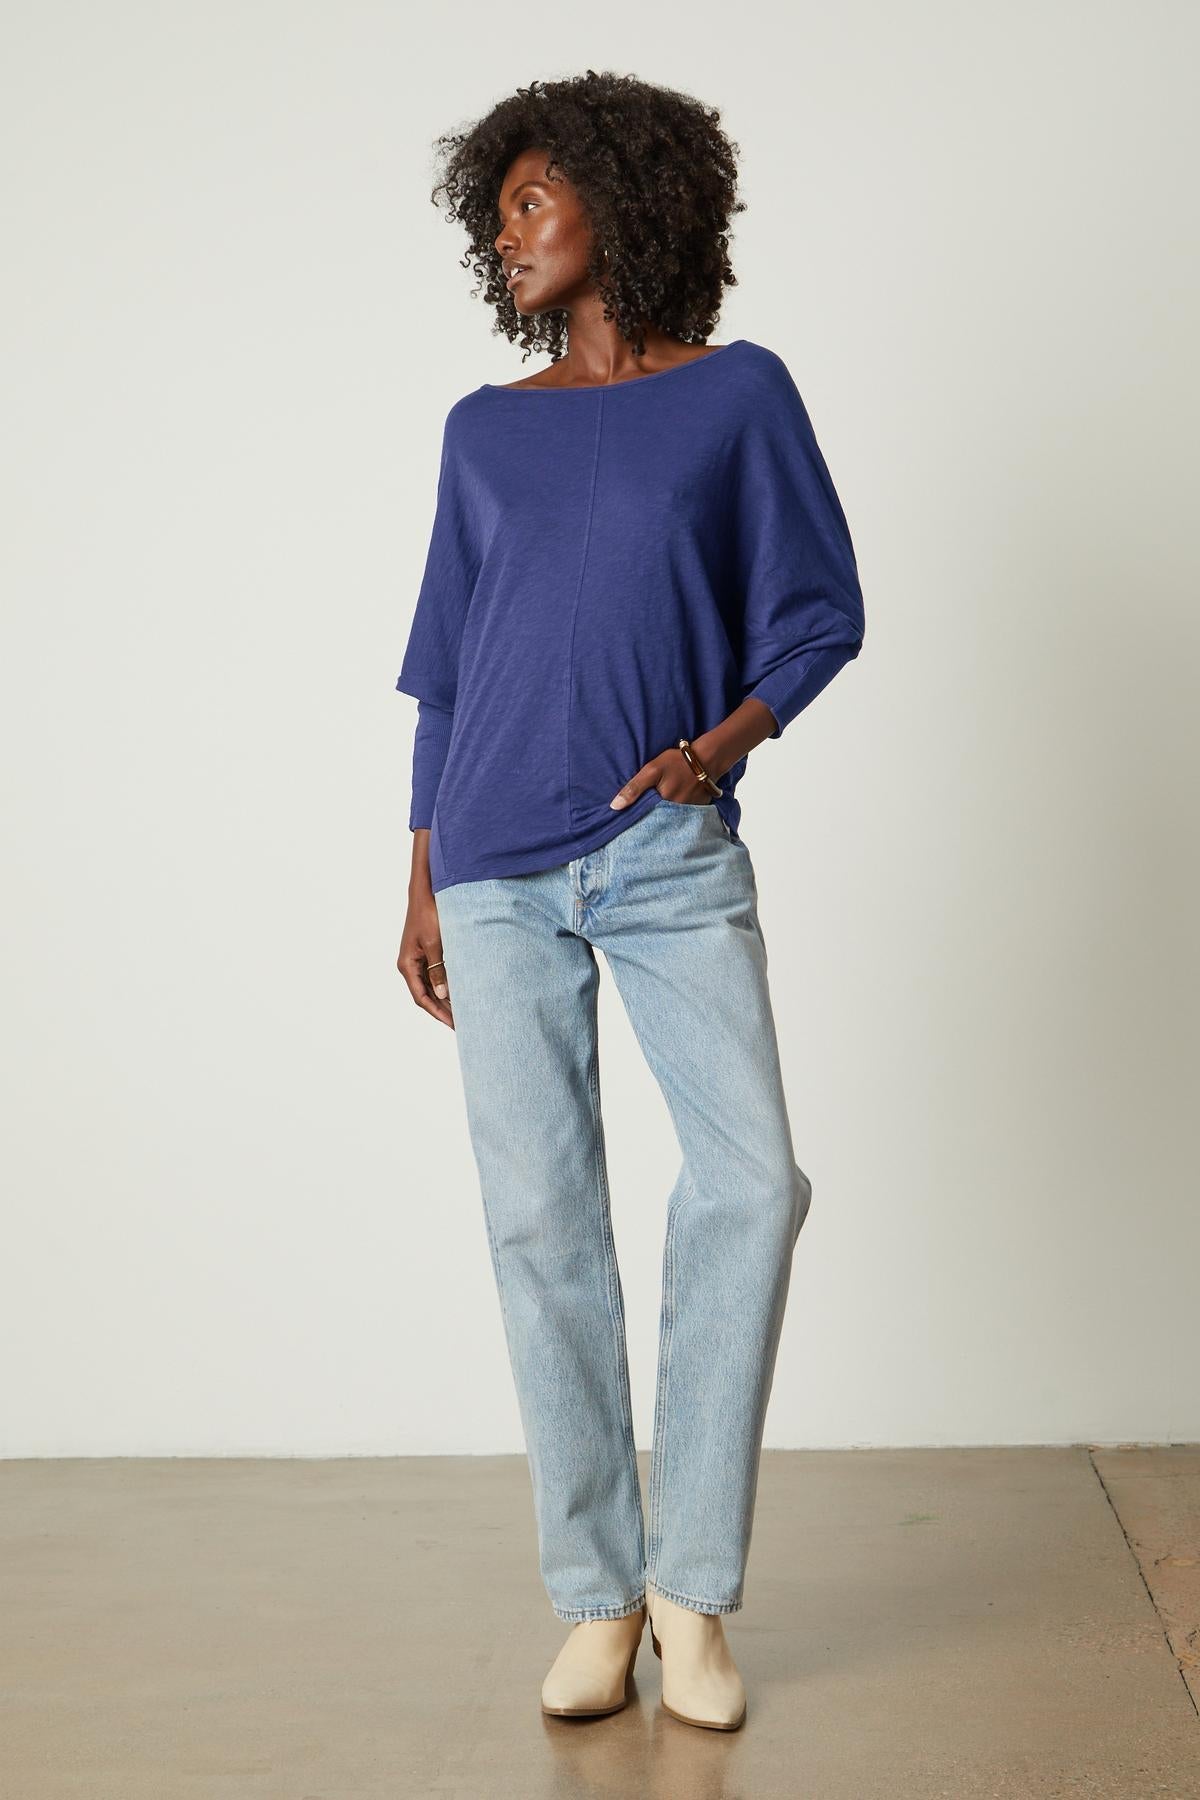 The model is wearing Velvet by Graham & Spencer jeans and a blue sweater.-35206719307969